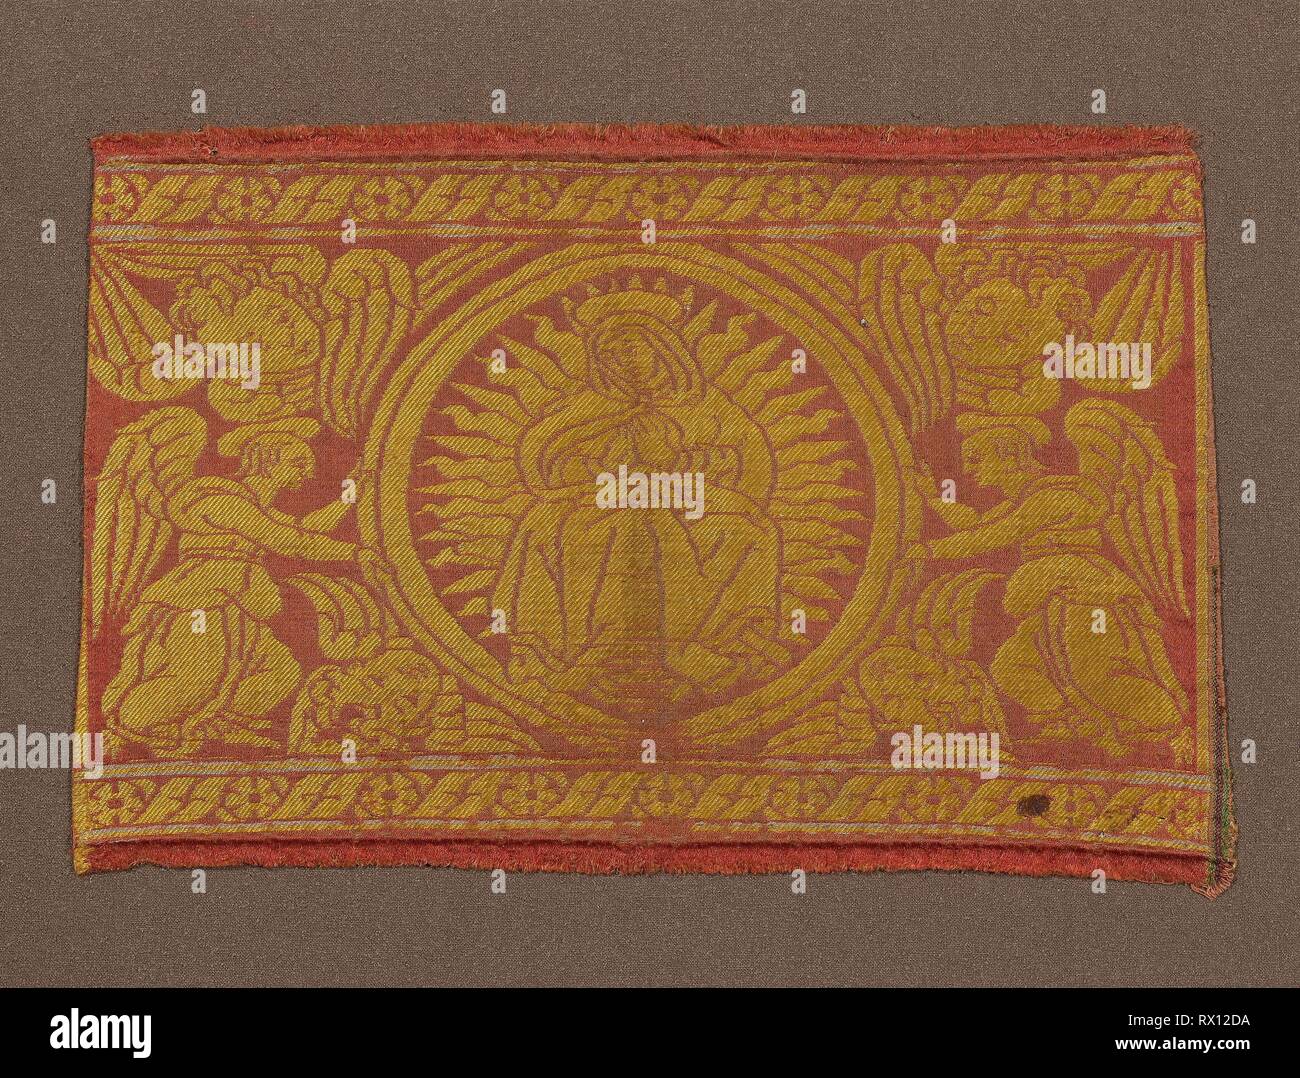 Fragment (From an Orphrey Band). Italy. Date: 1401-1500. Dimensions: 24.8 x 38 cm (9 3/4 x 15 in.). Silk, satin weave with twill interlacings of secondary binding warps and patterning wefts. Origin: Italy. Museum: The Chicago Art Institute. Stock Photo